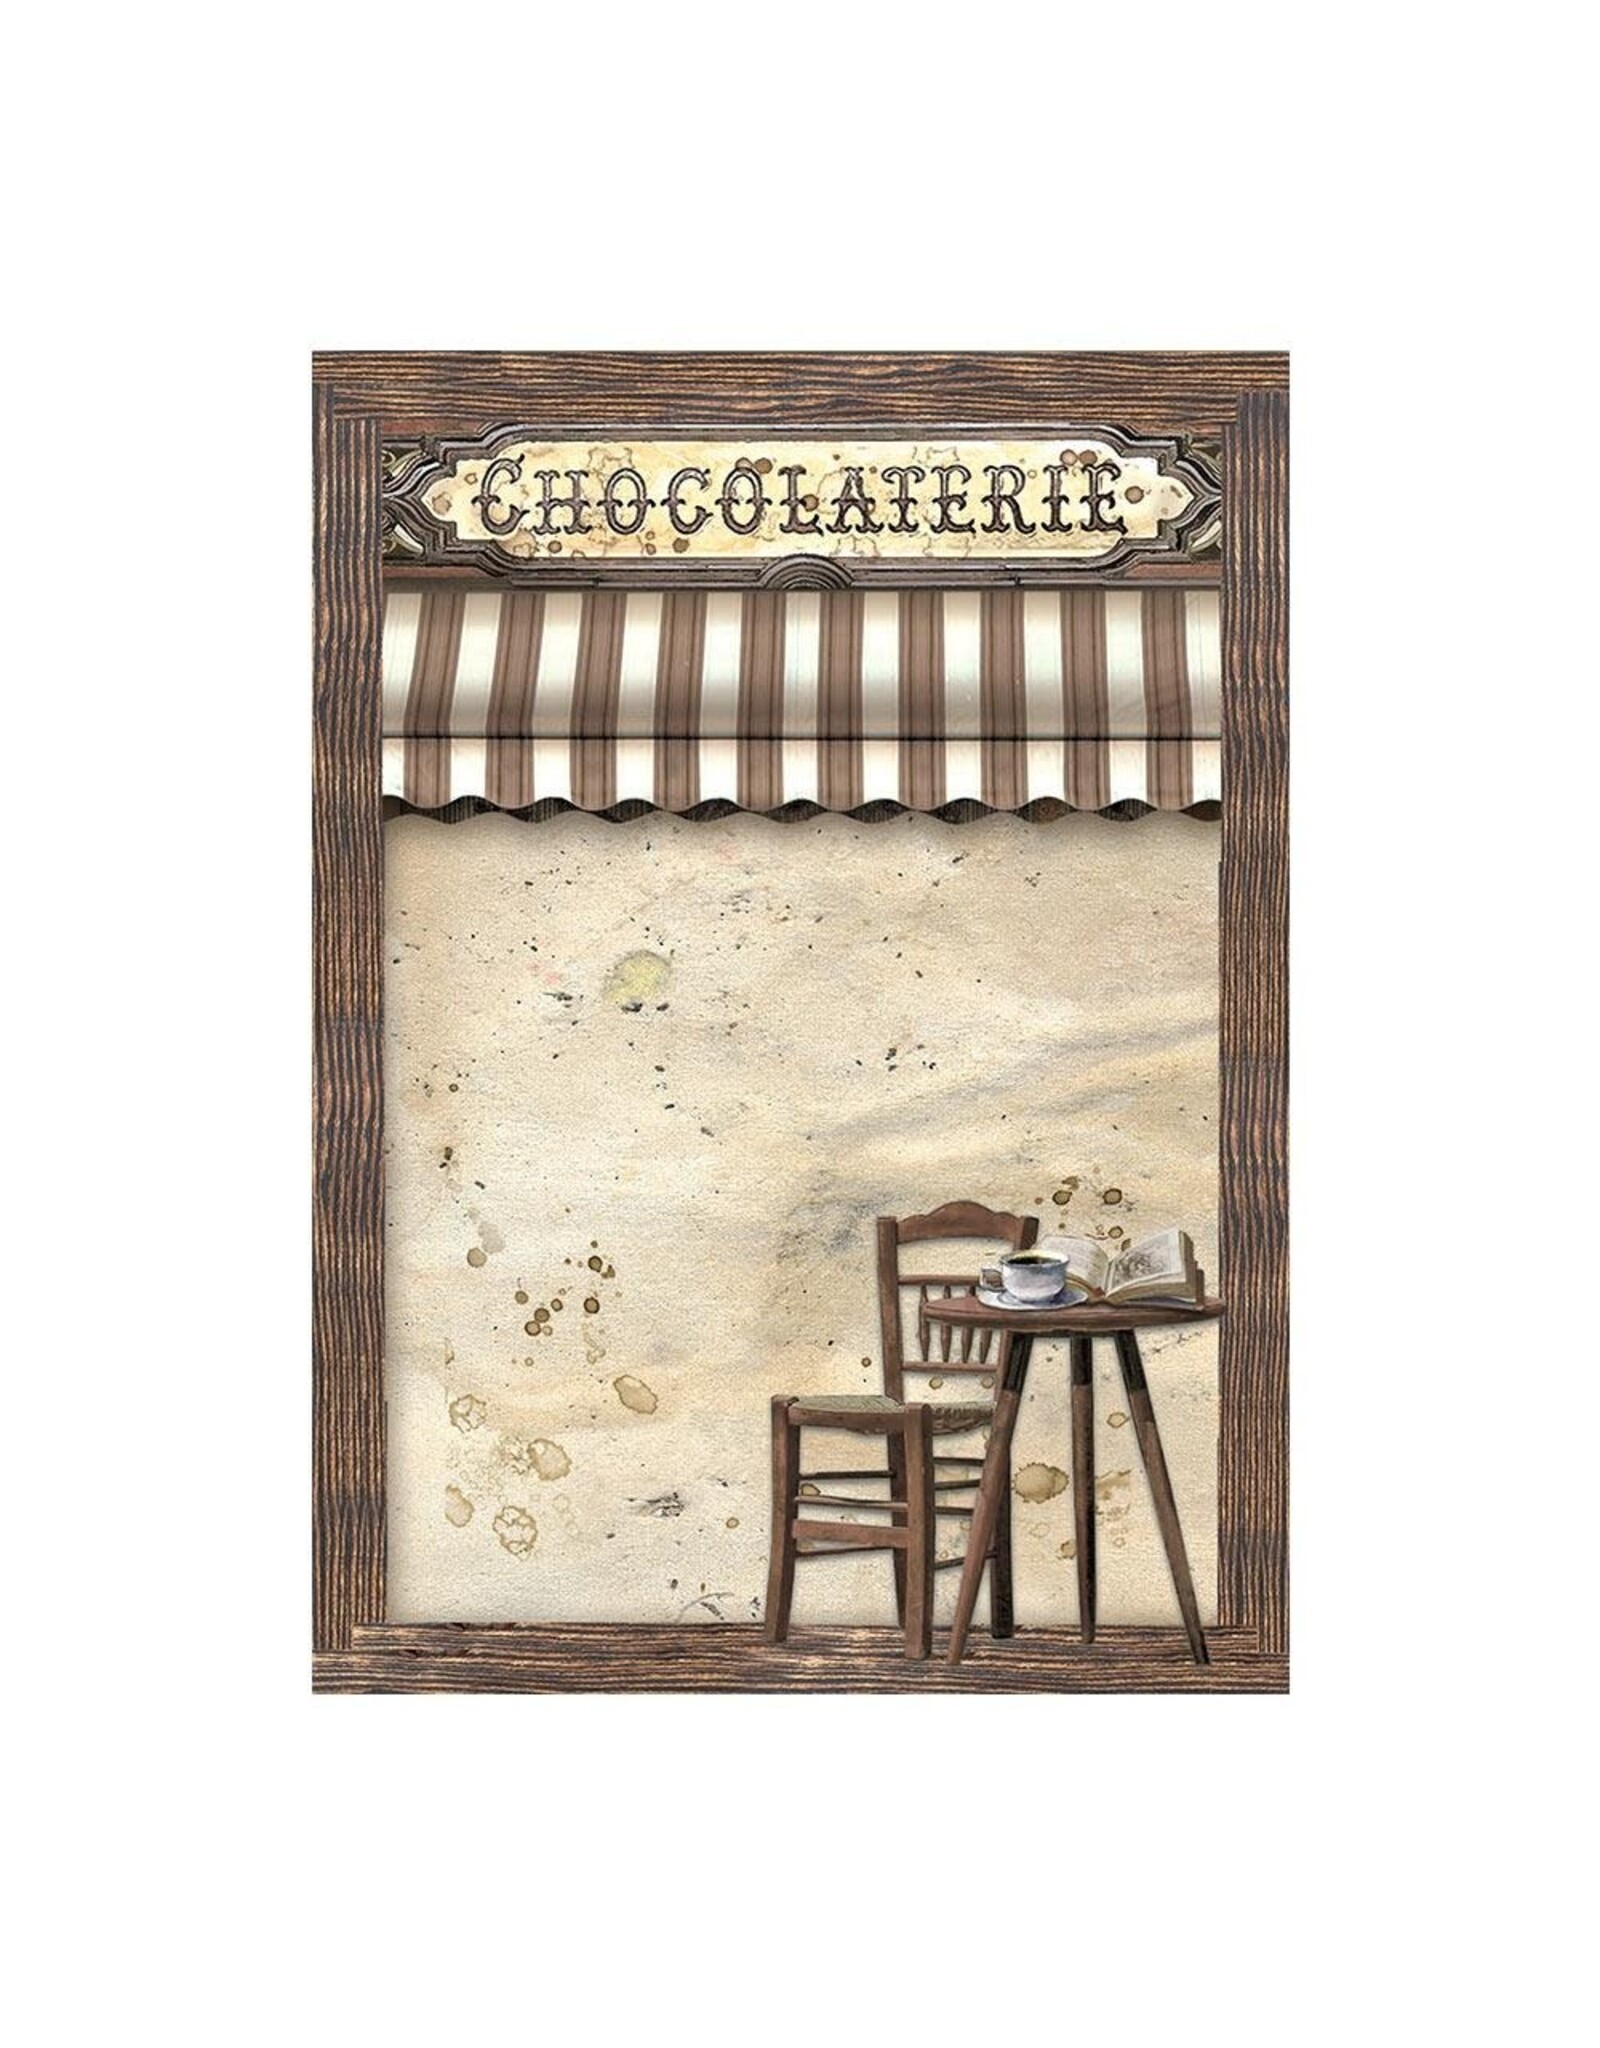 STAMPERIA STAMPERIA COFFEE AND CHOCOLATE ASSORTED A6 RICE PAPER DECOUPAGE BACKGROUNDS 10.5X14.8CM 8/PK